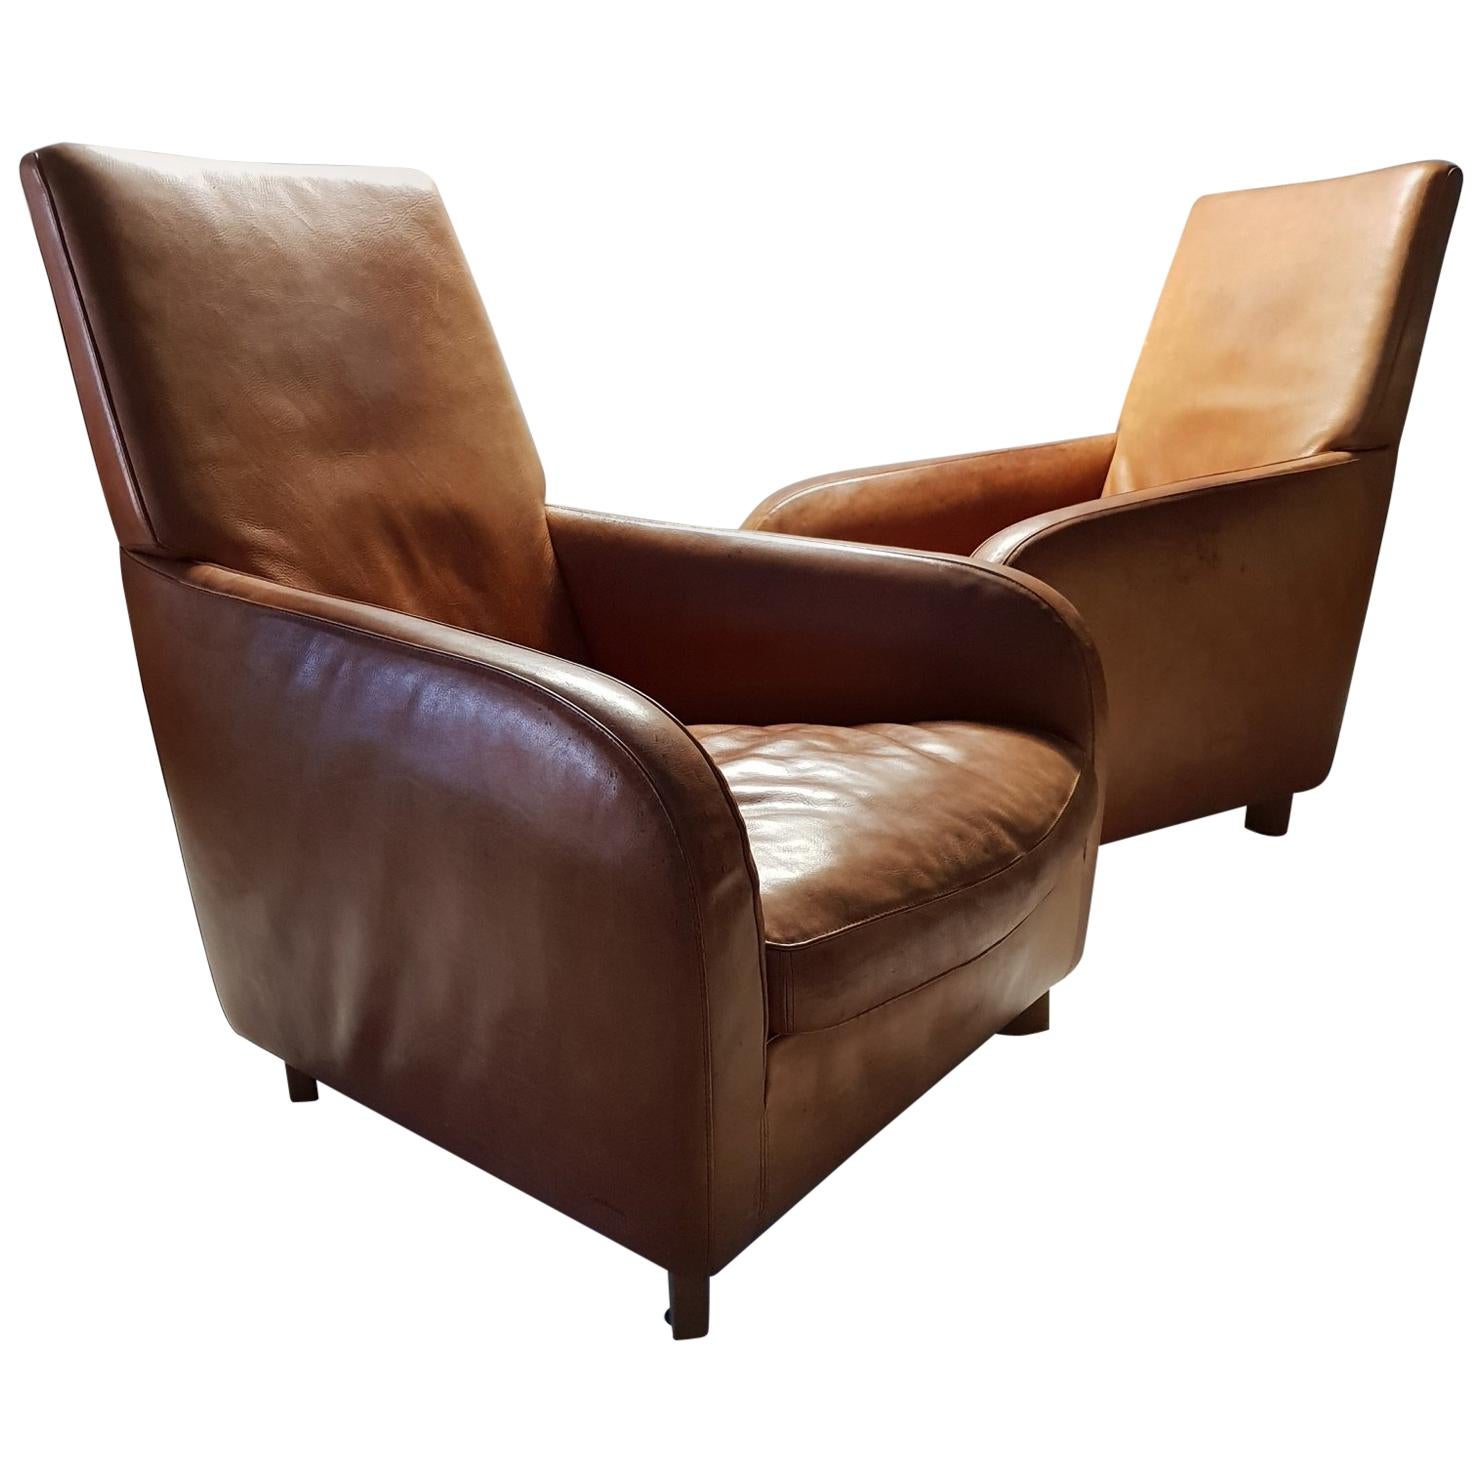 Pair of High Quality Cognac Leather Lounge Chairs by Molinari 'Marked', 1990s